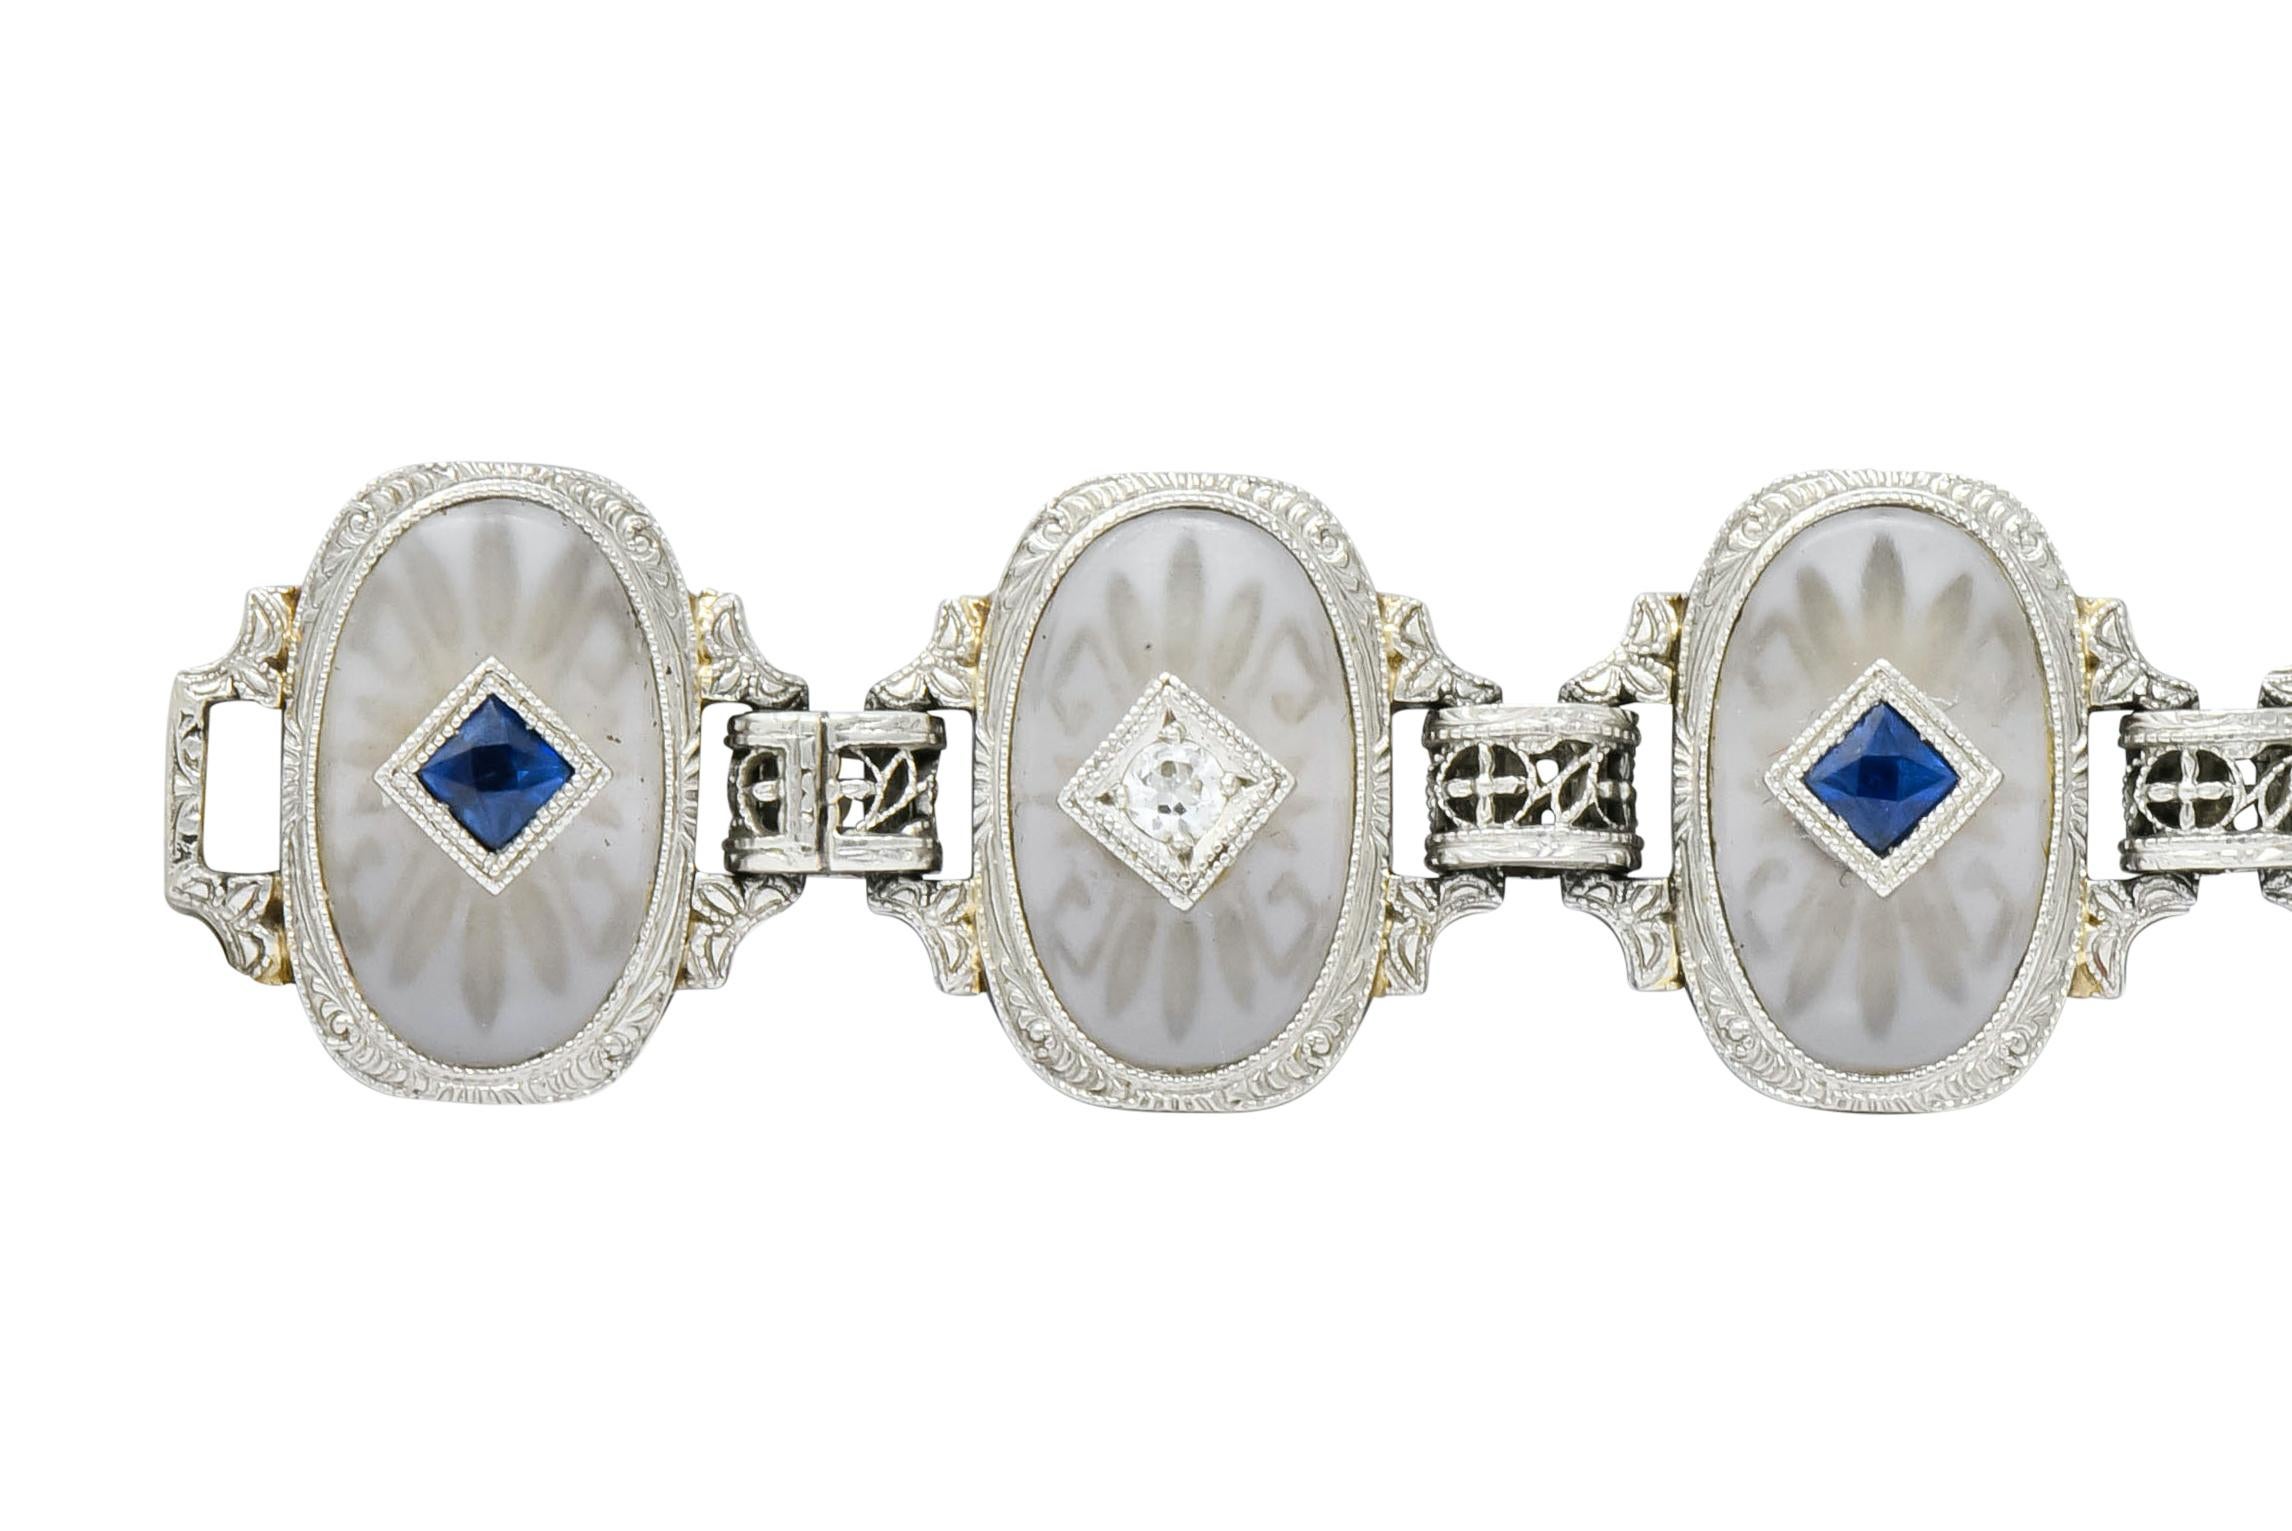 Link style bracelet comprised of deeply carved oval camphor glass, bezel set in a delicately engraved millegrain surround, each centering either a French cut sapphire or a transitional cut diamond

Diamonds weigh approximately 0.31 carat, eye-clean